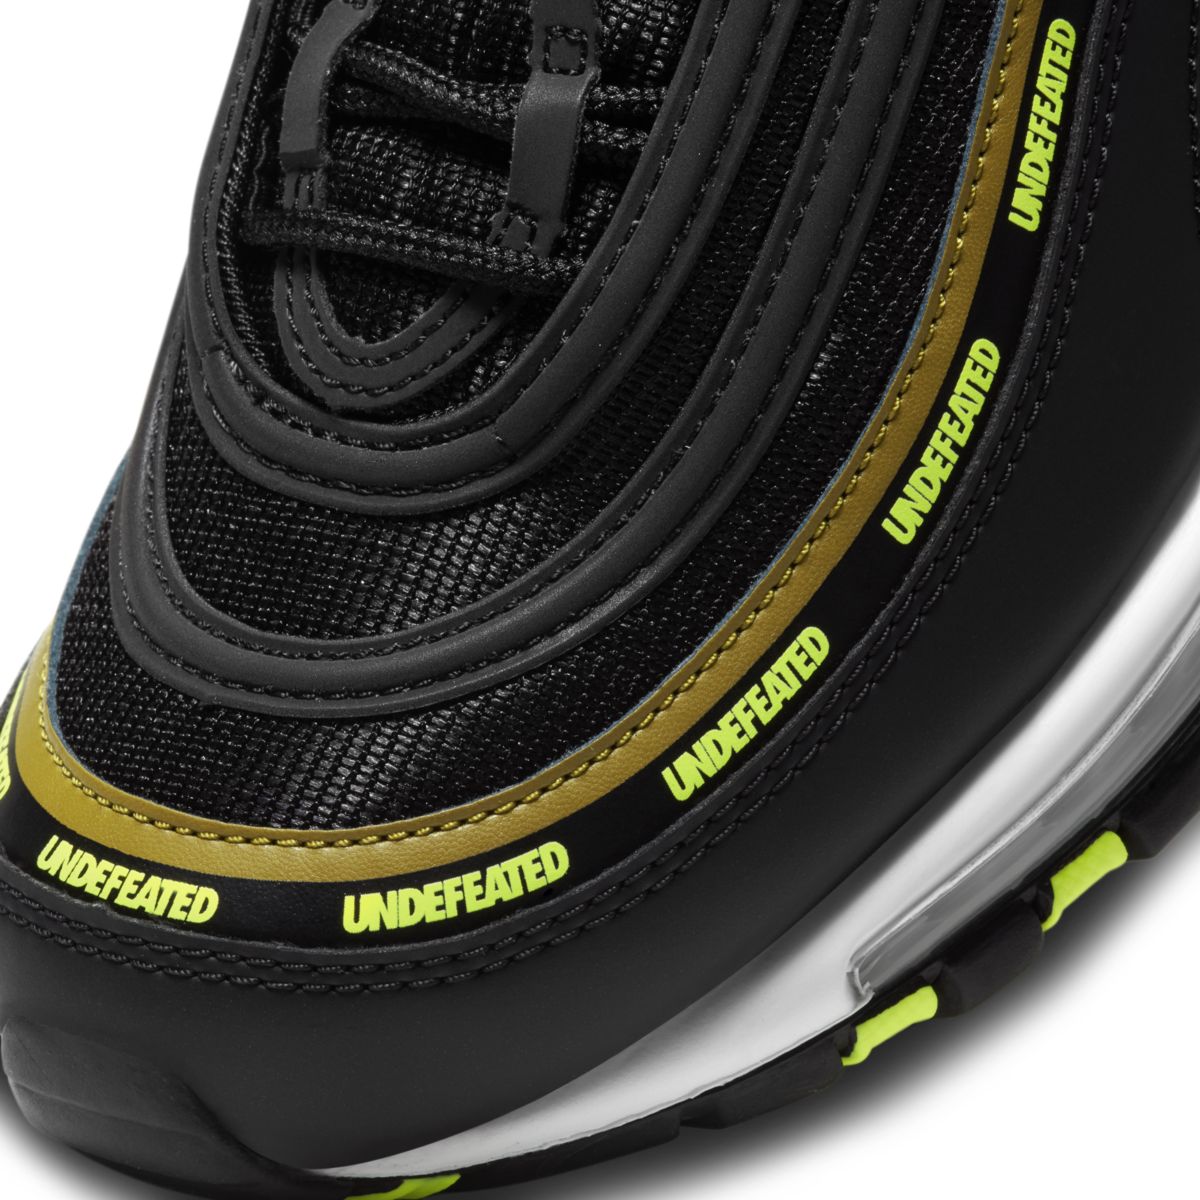 Undefeated x Nike Air Max 97 Black Volt DC4830-001 7